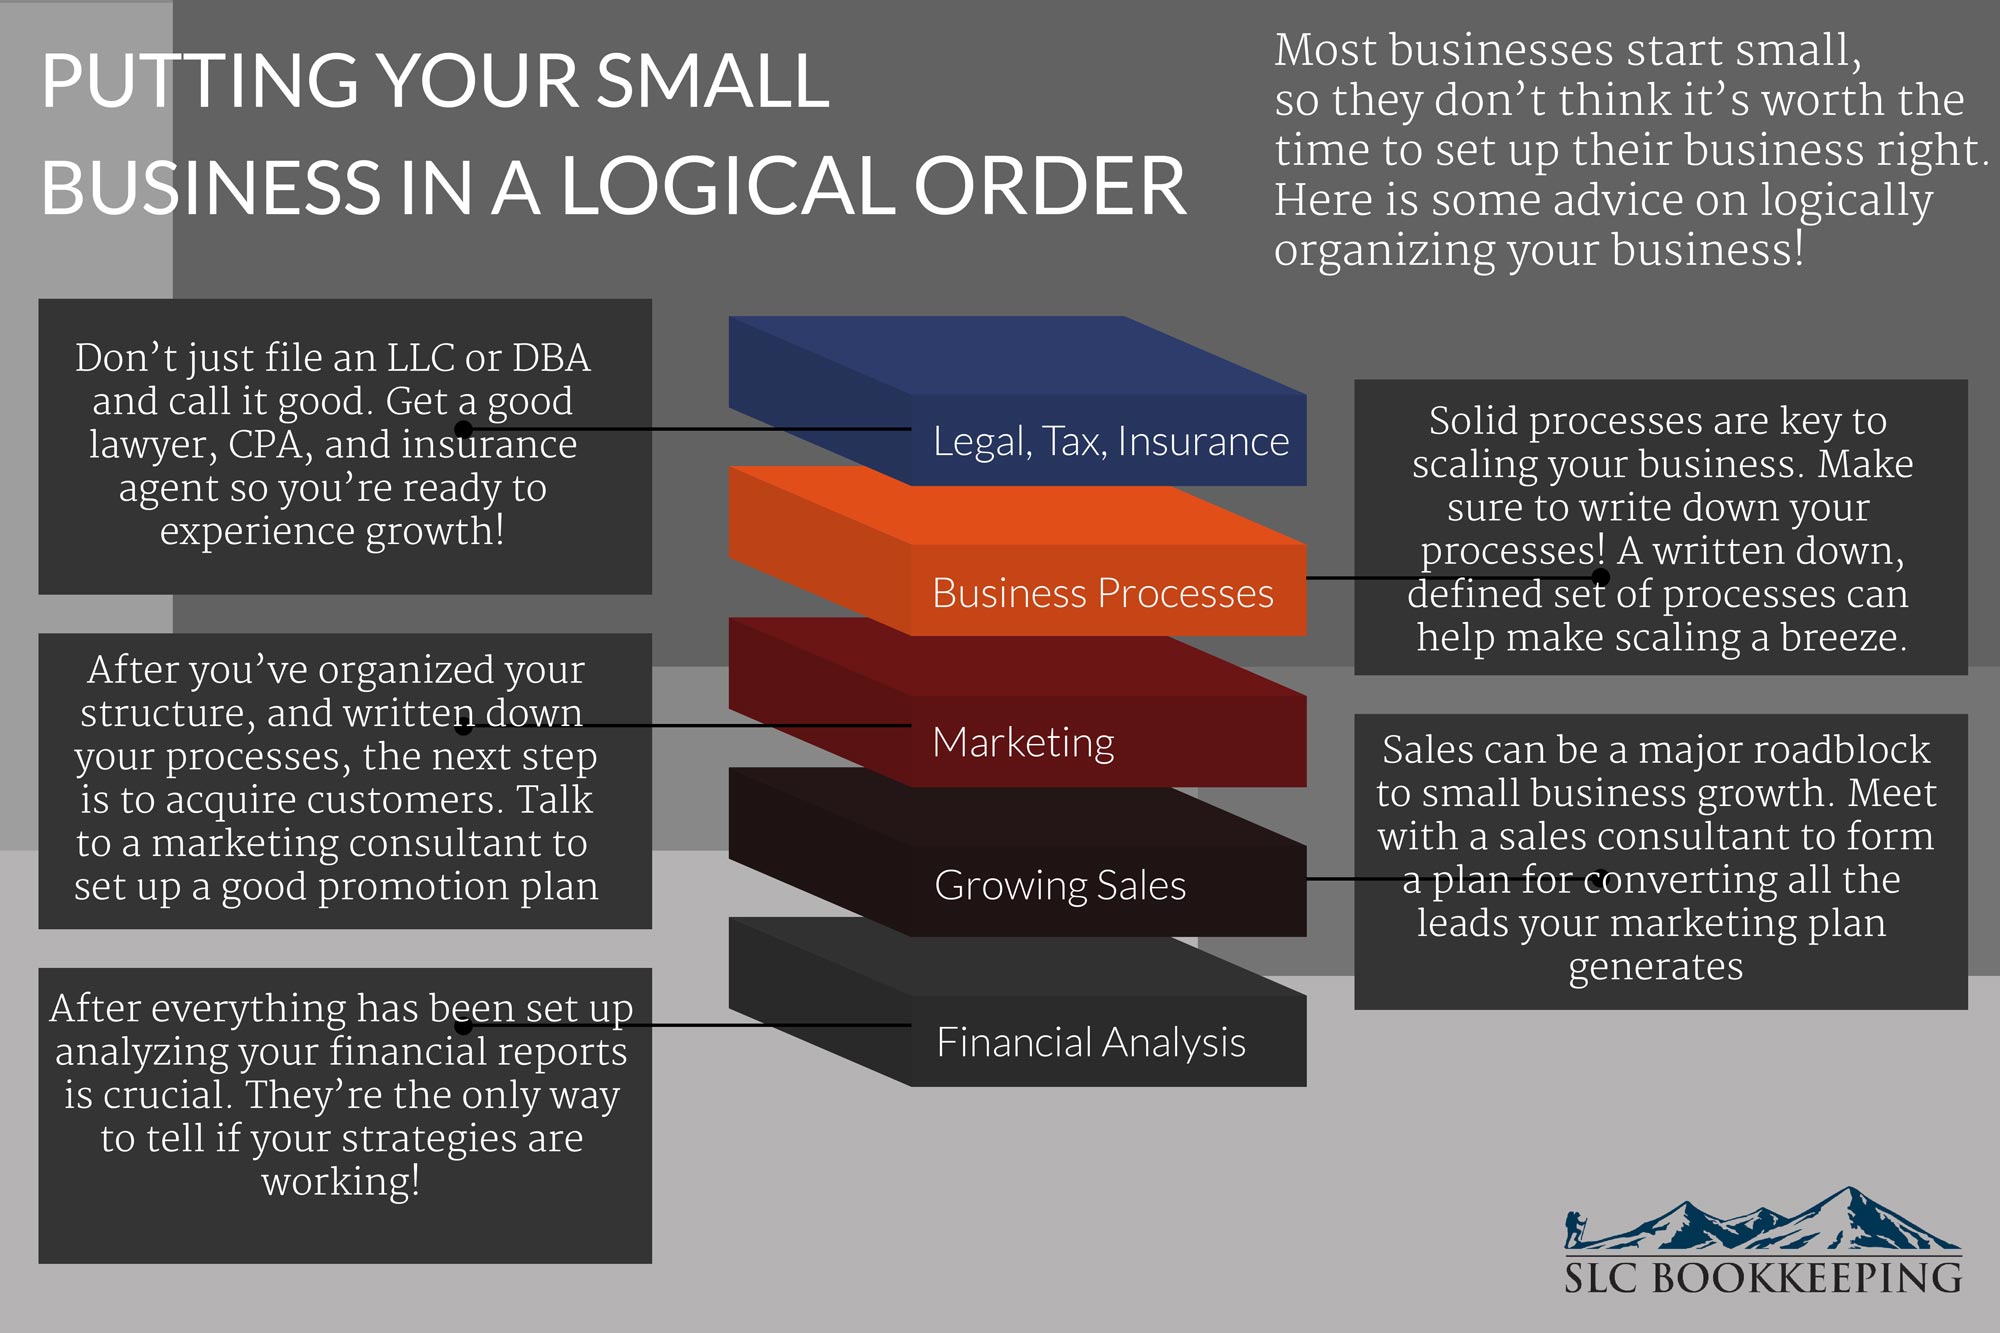 [Infographic] Putting Your Small Business in a Logical Order